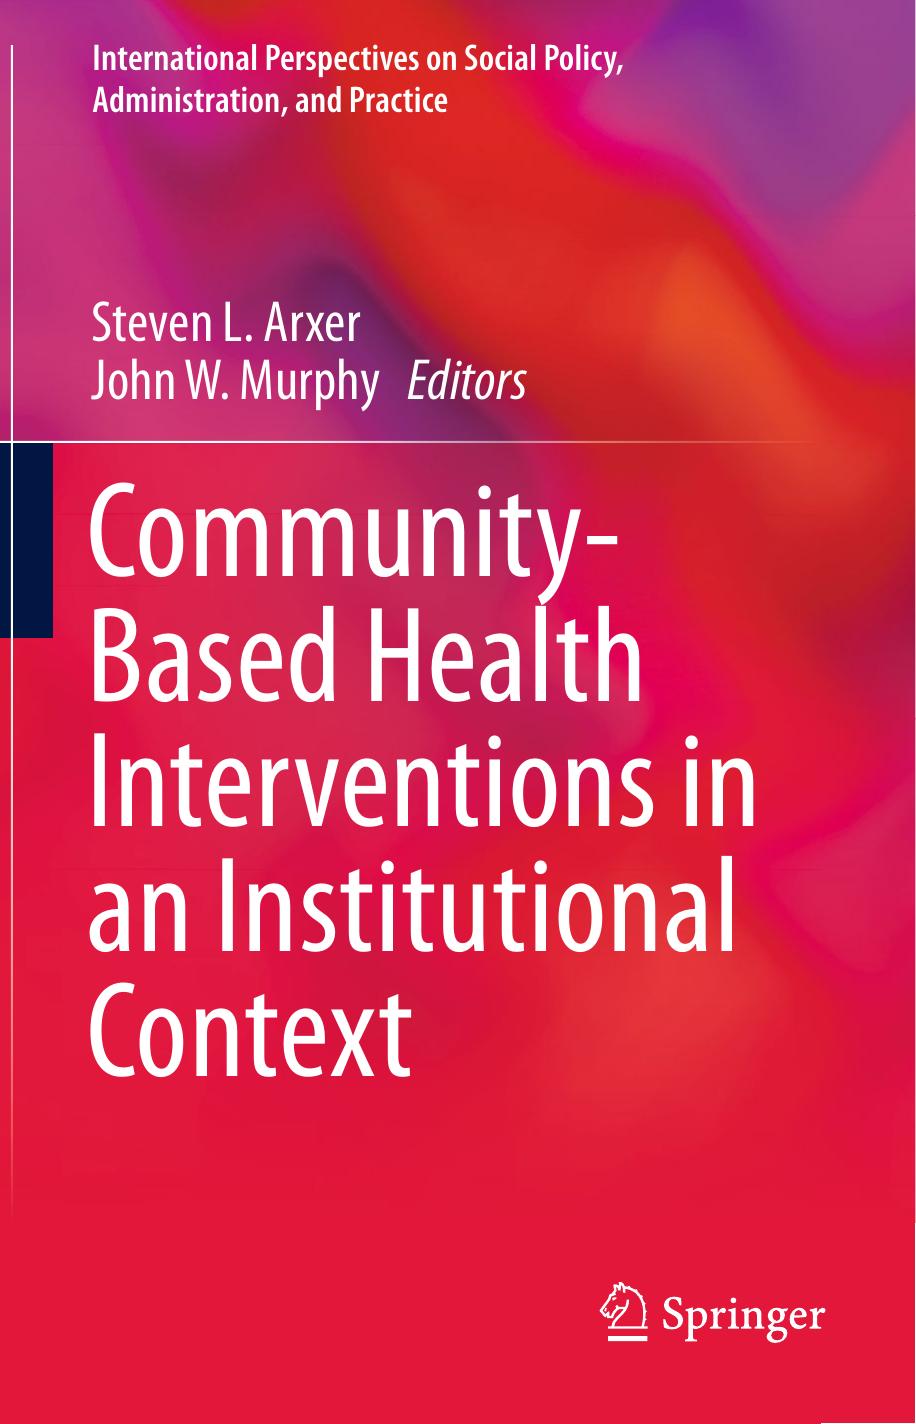 Community-Based Health Interventions in an Institutional, 2019